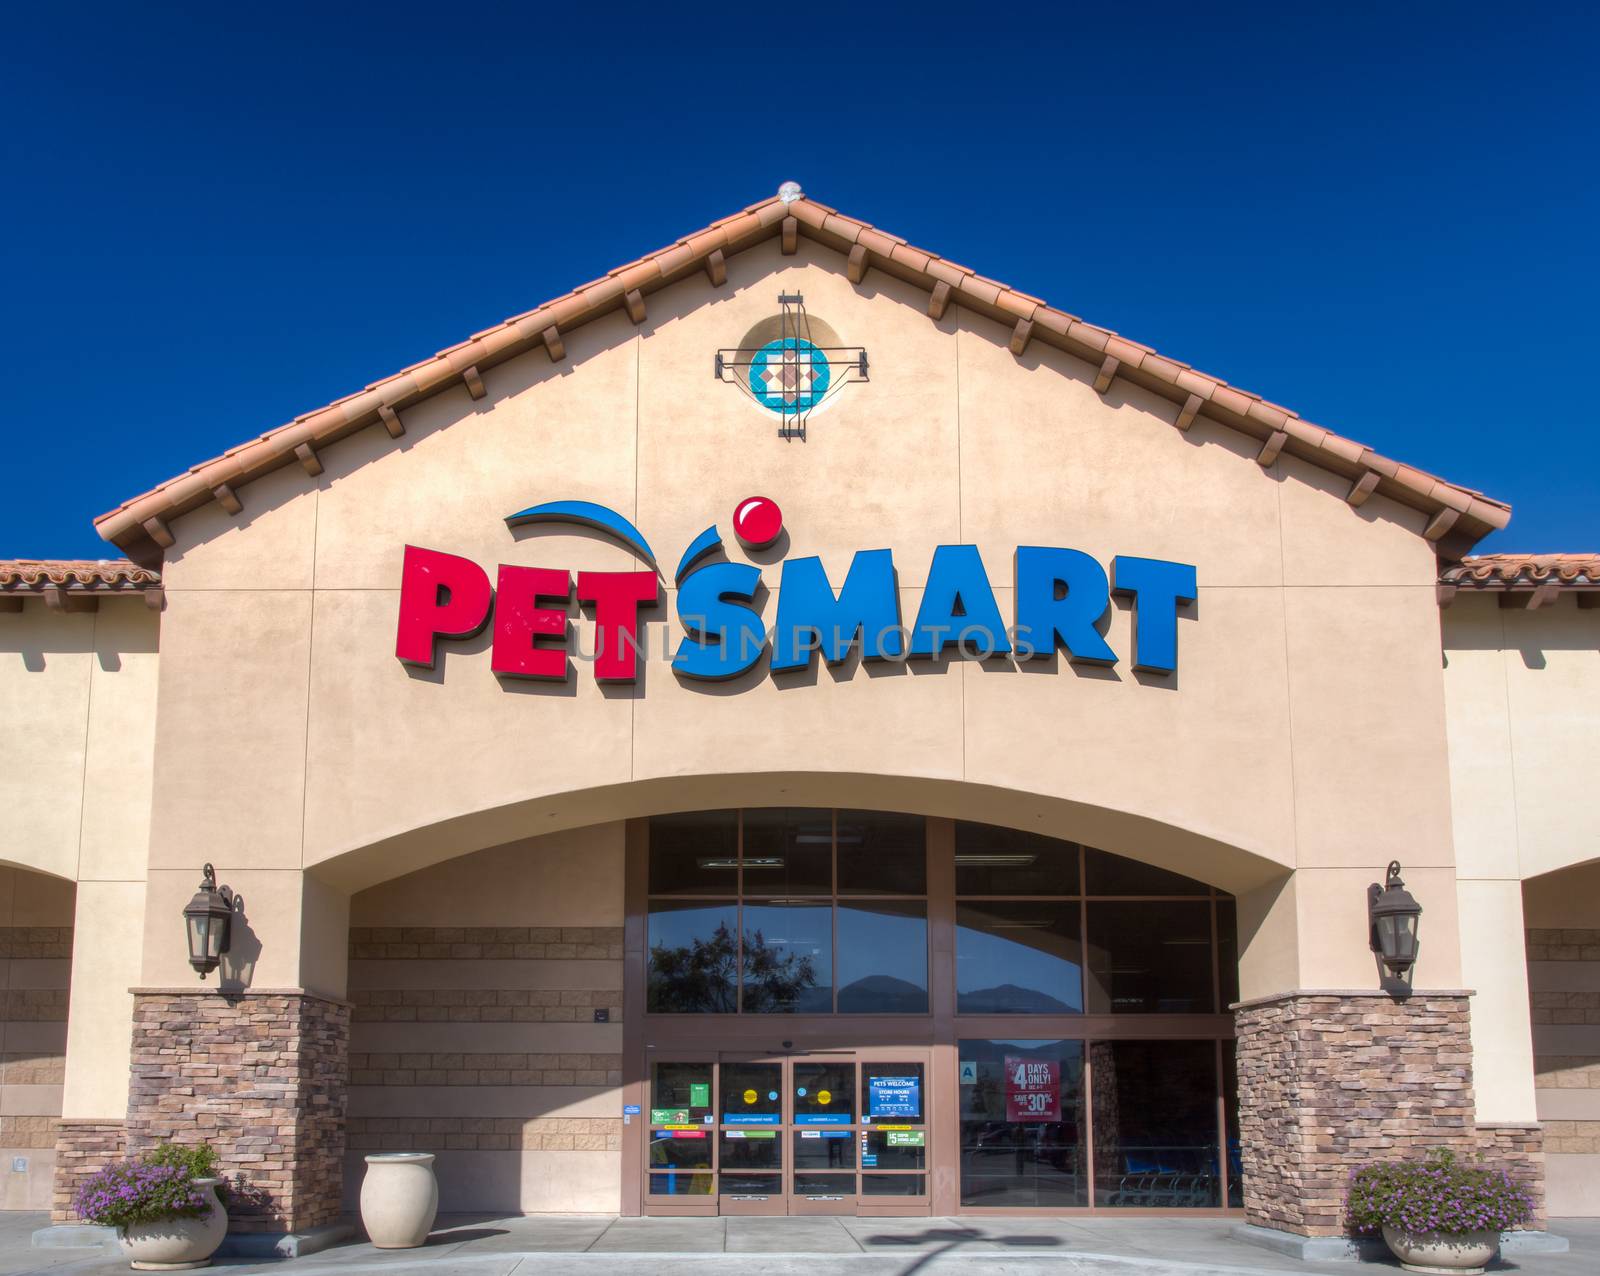 PetSmart Store Exterior View by wolterk